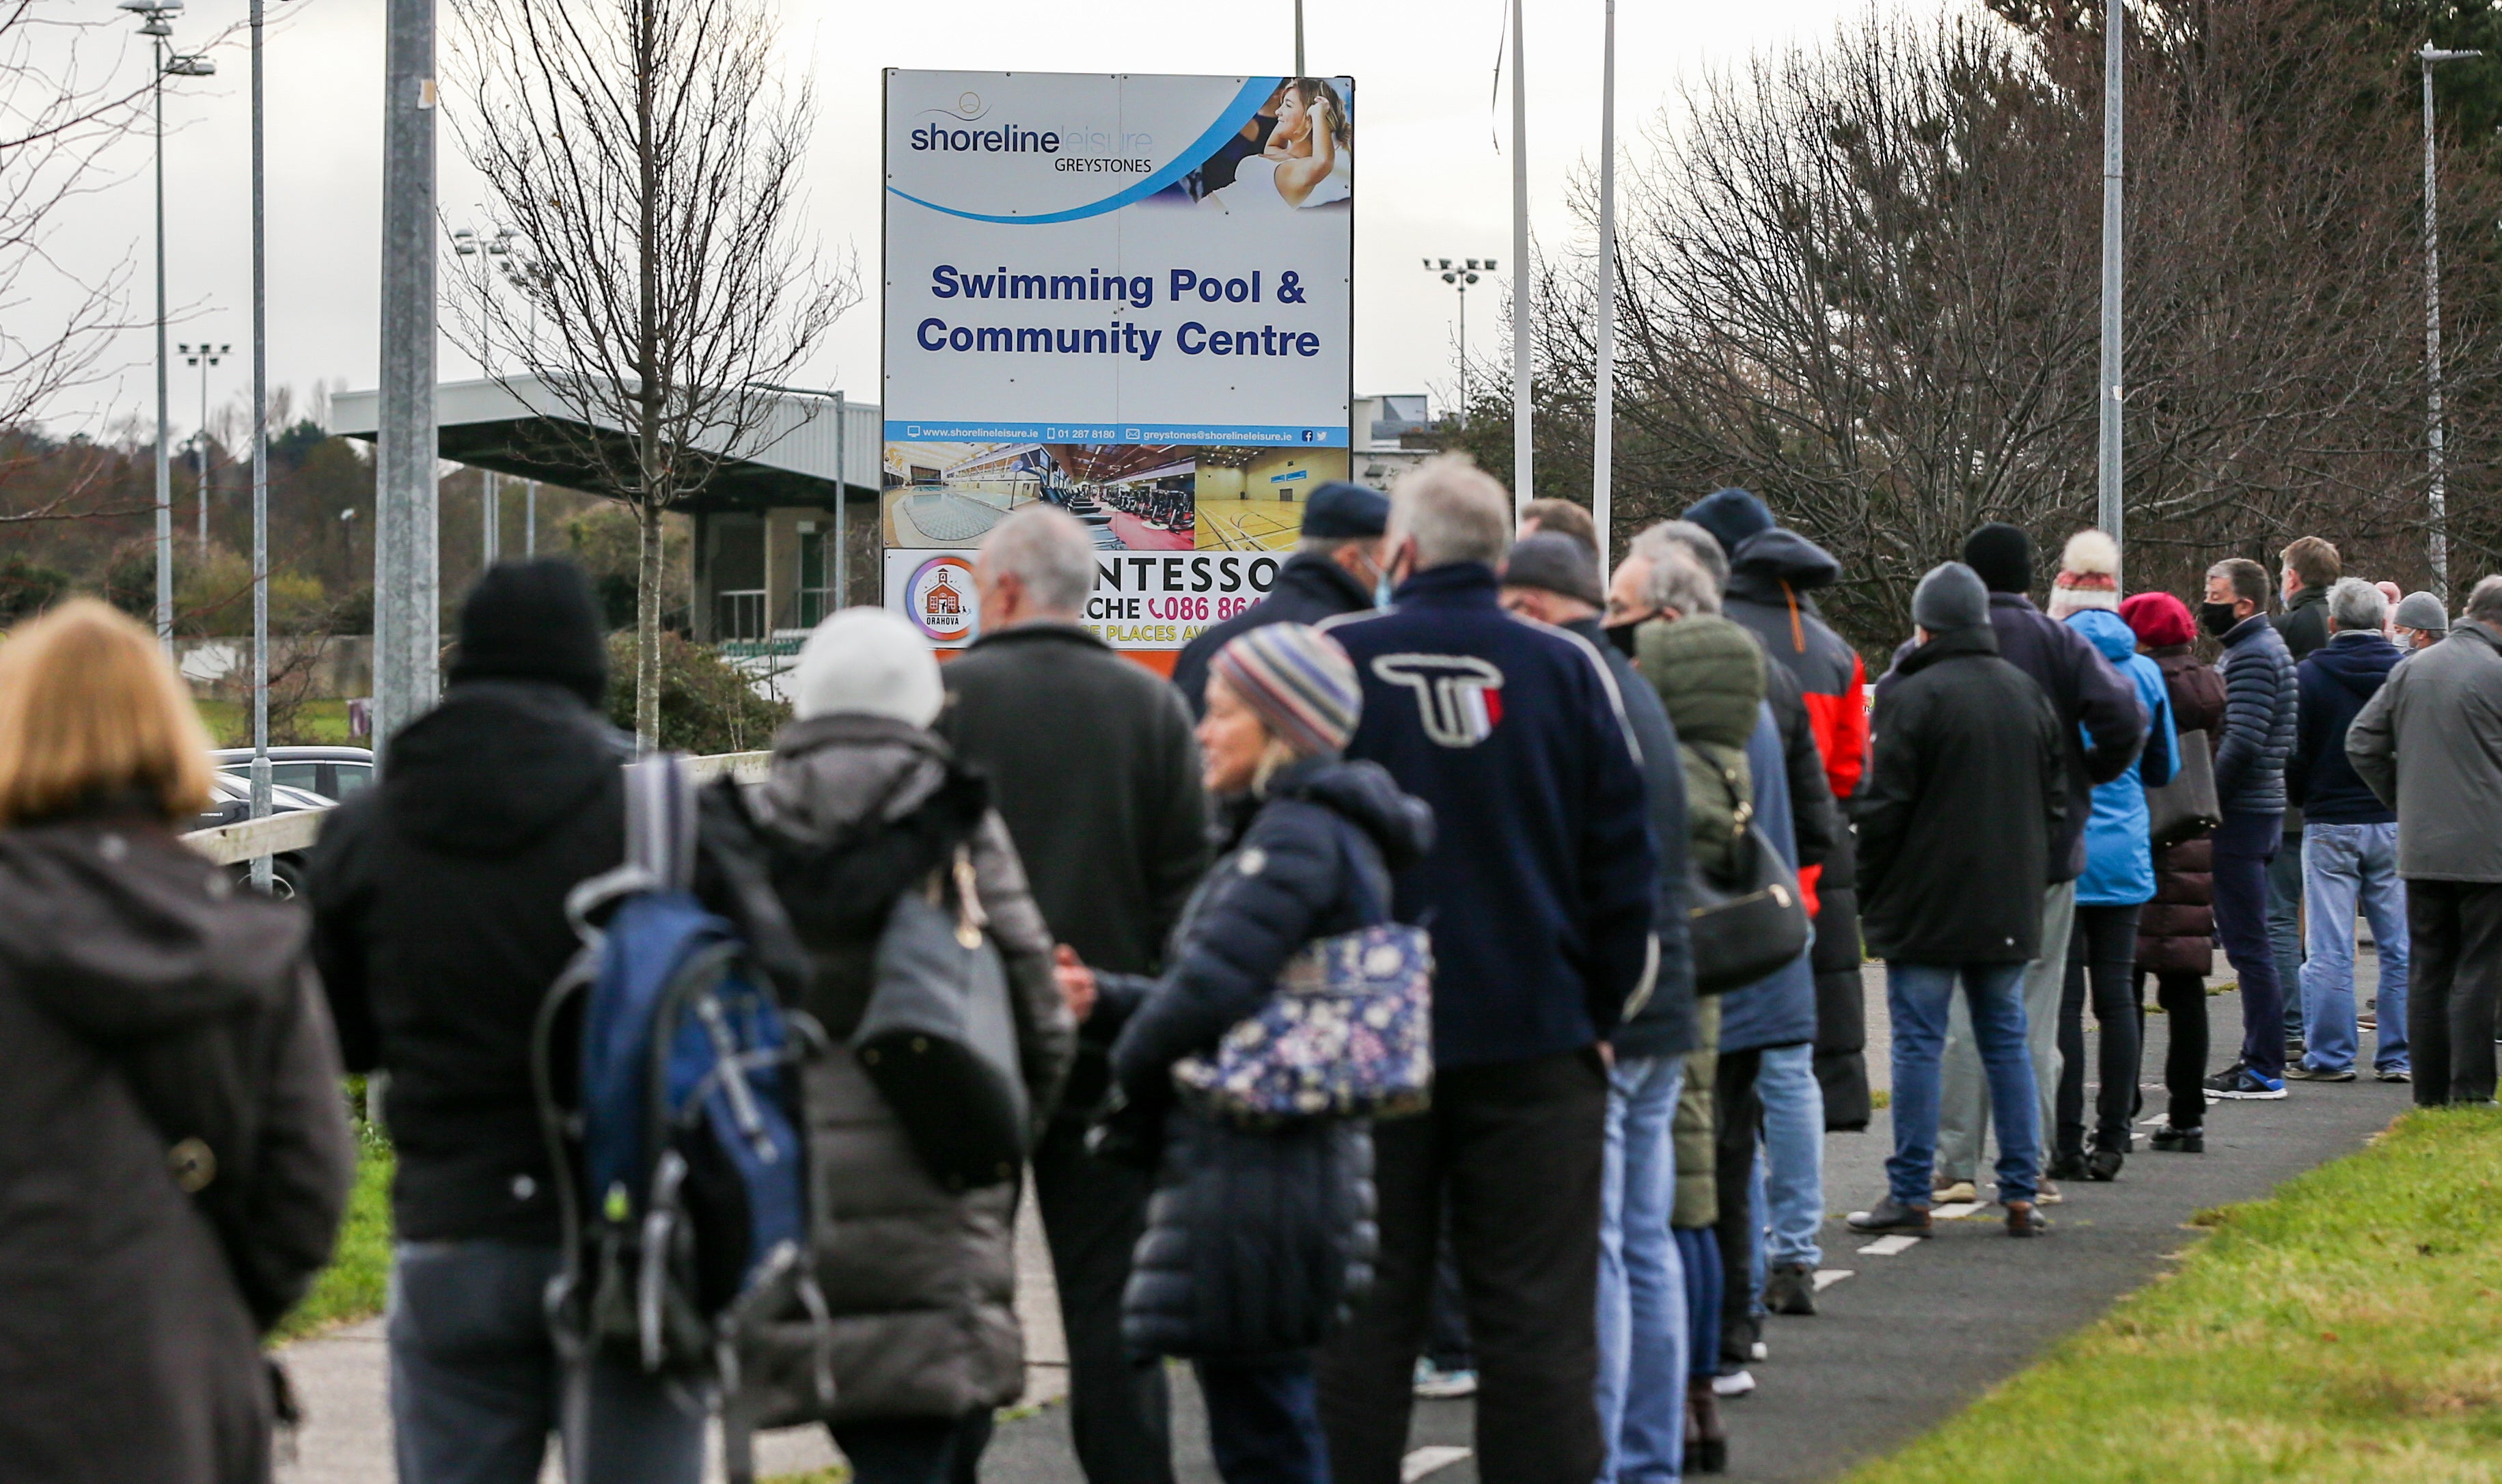 Queues of people form outside a walk-in vaccination centre in Greystones, Co Wicklow (Damien Storan/PA)